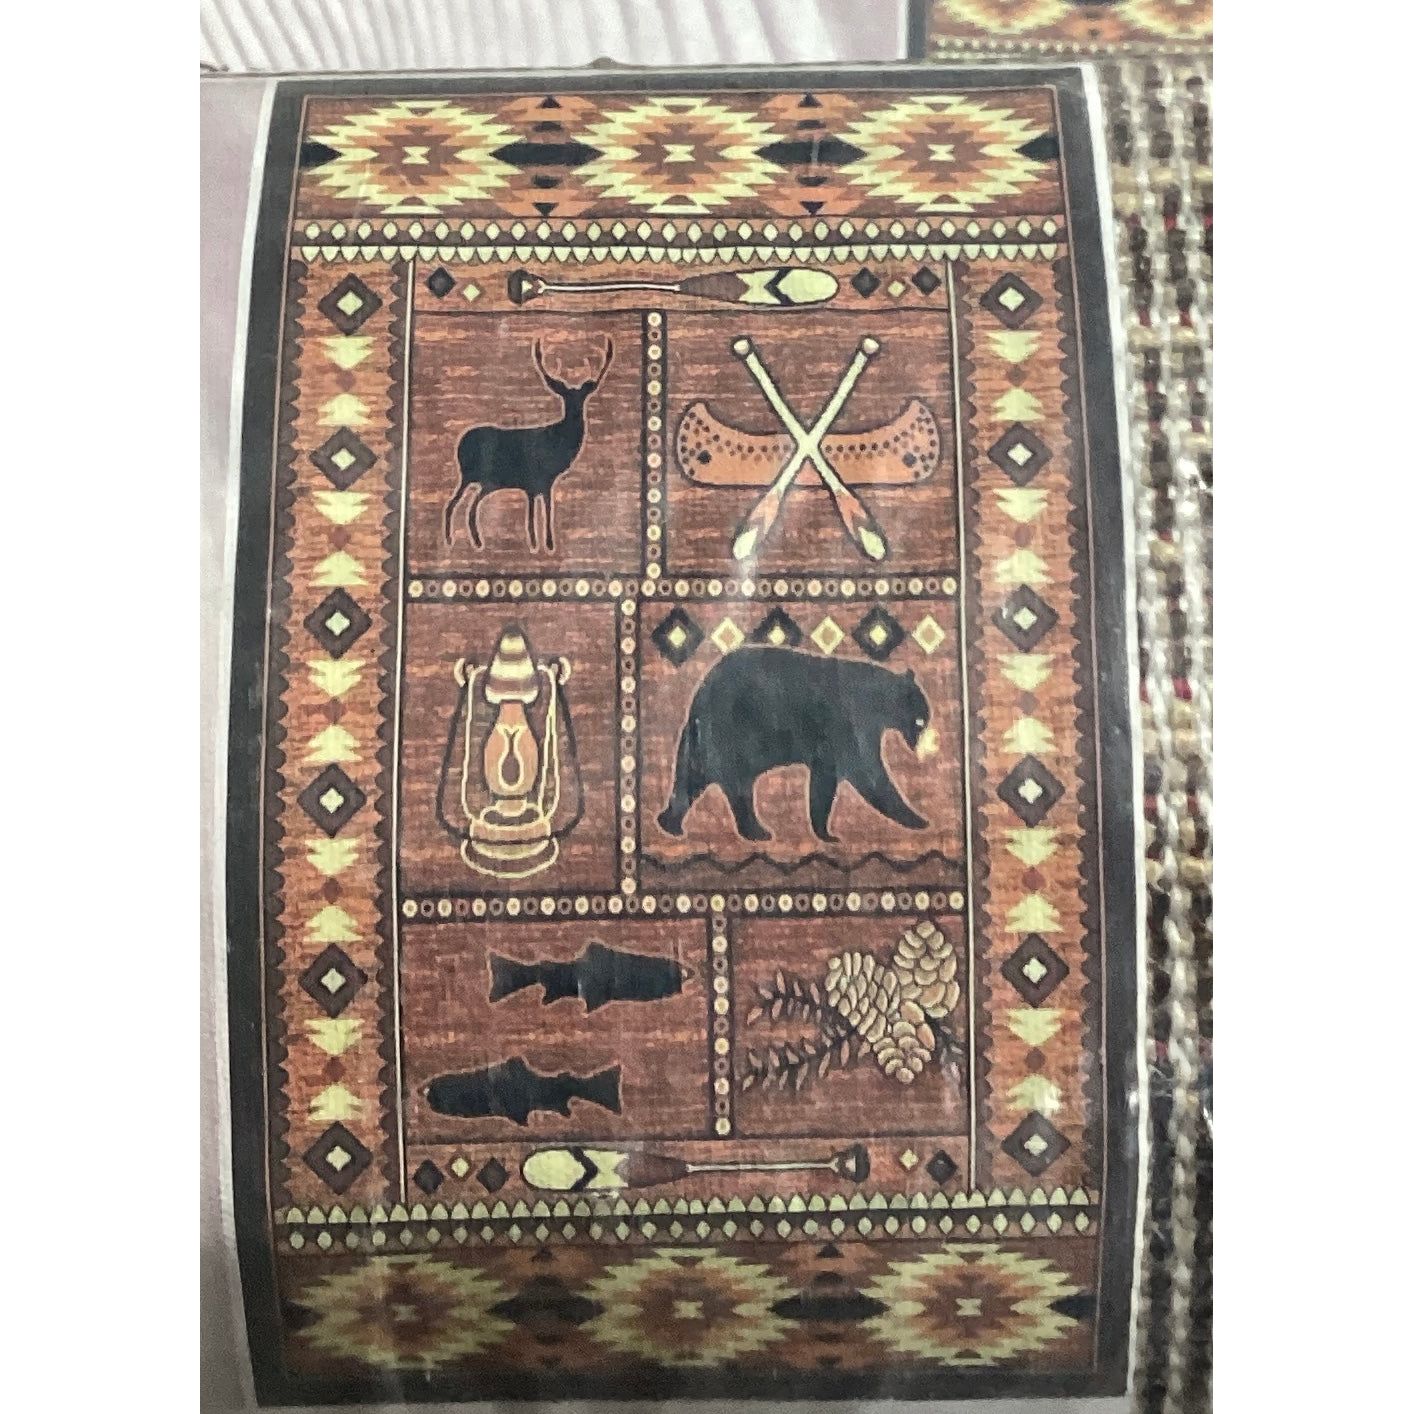 A rug featuring a bear, deer, and various other animals.